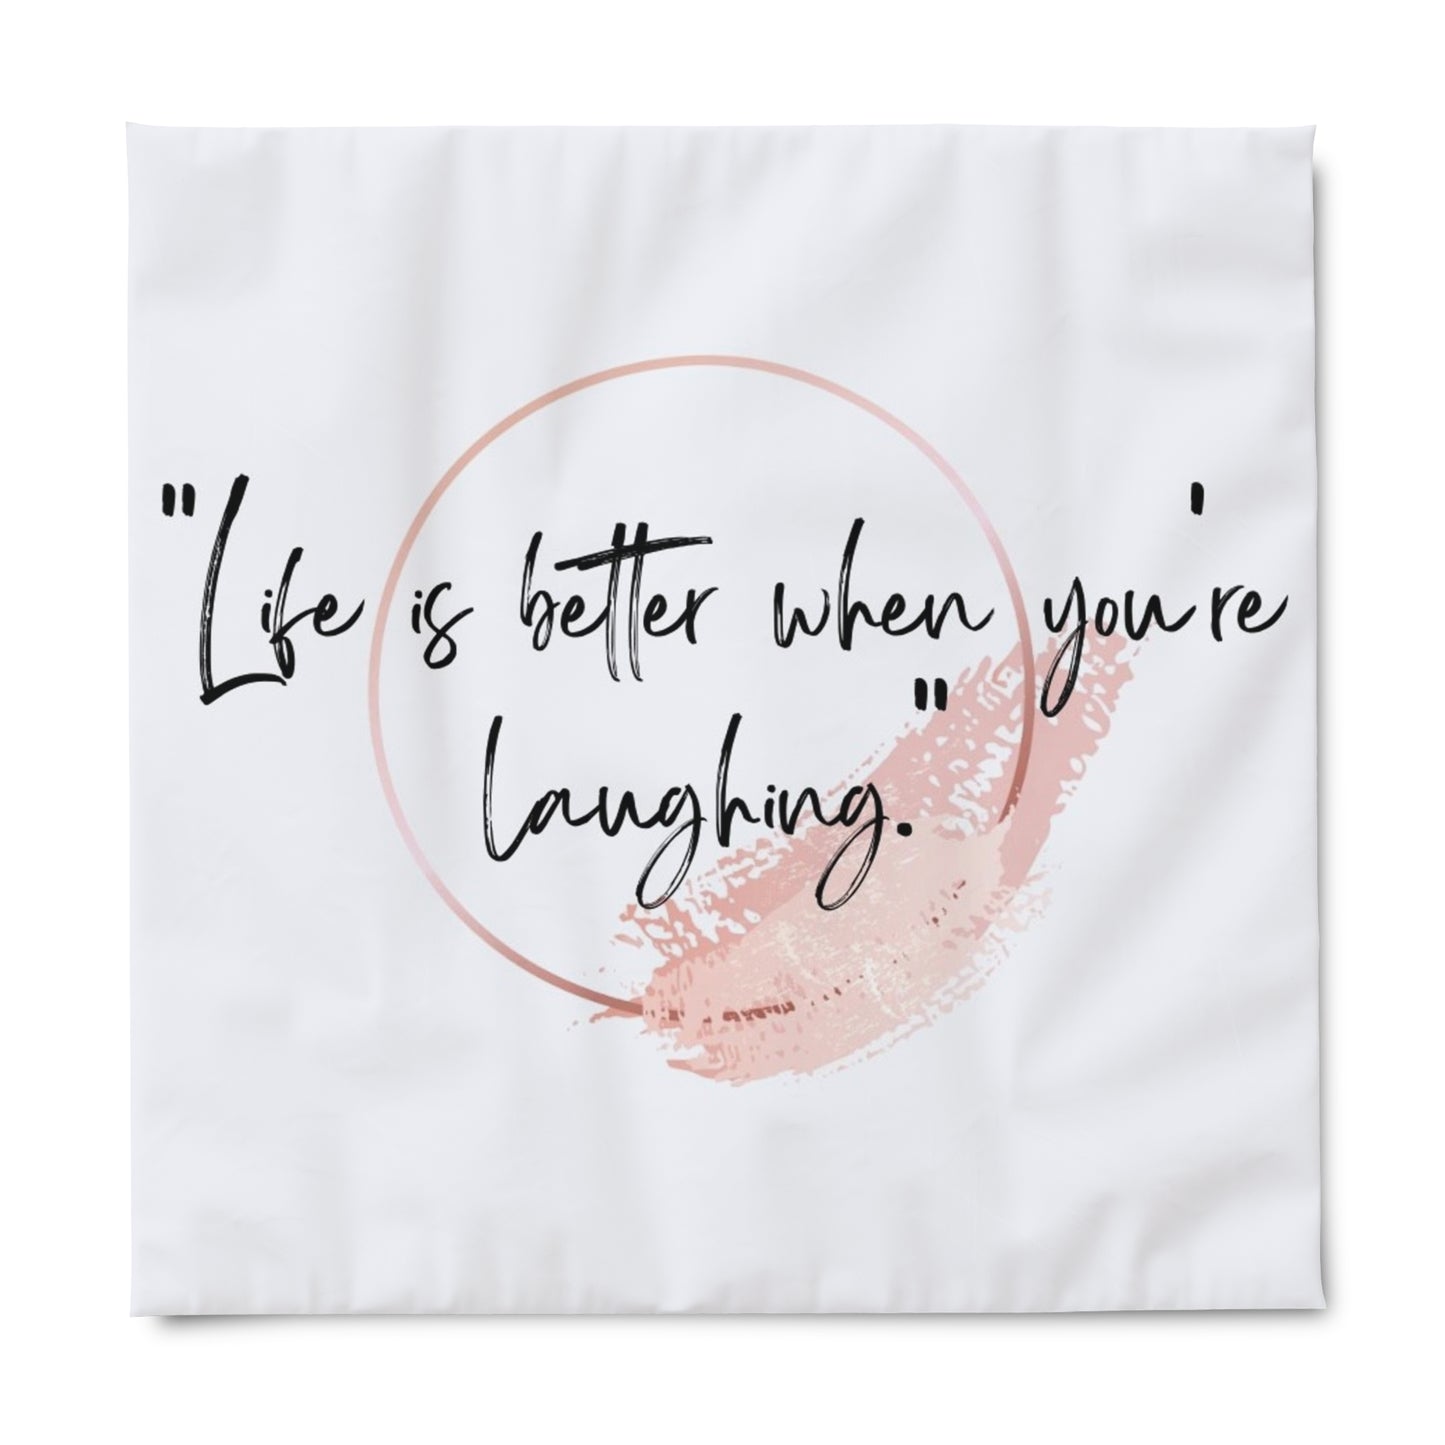 "Life is better when you're laughing" Duvet Cover